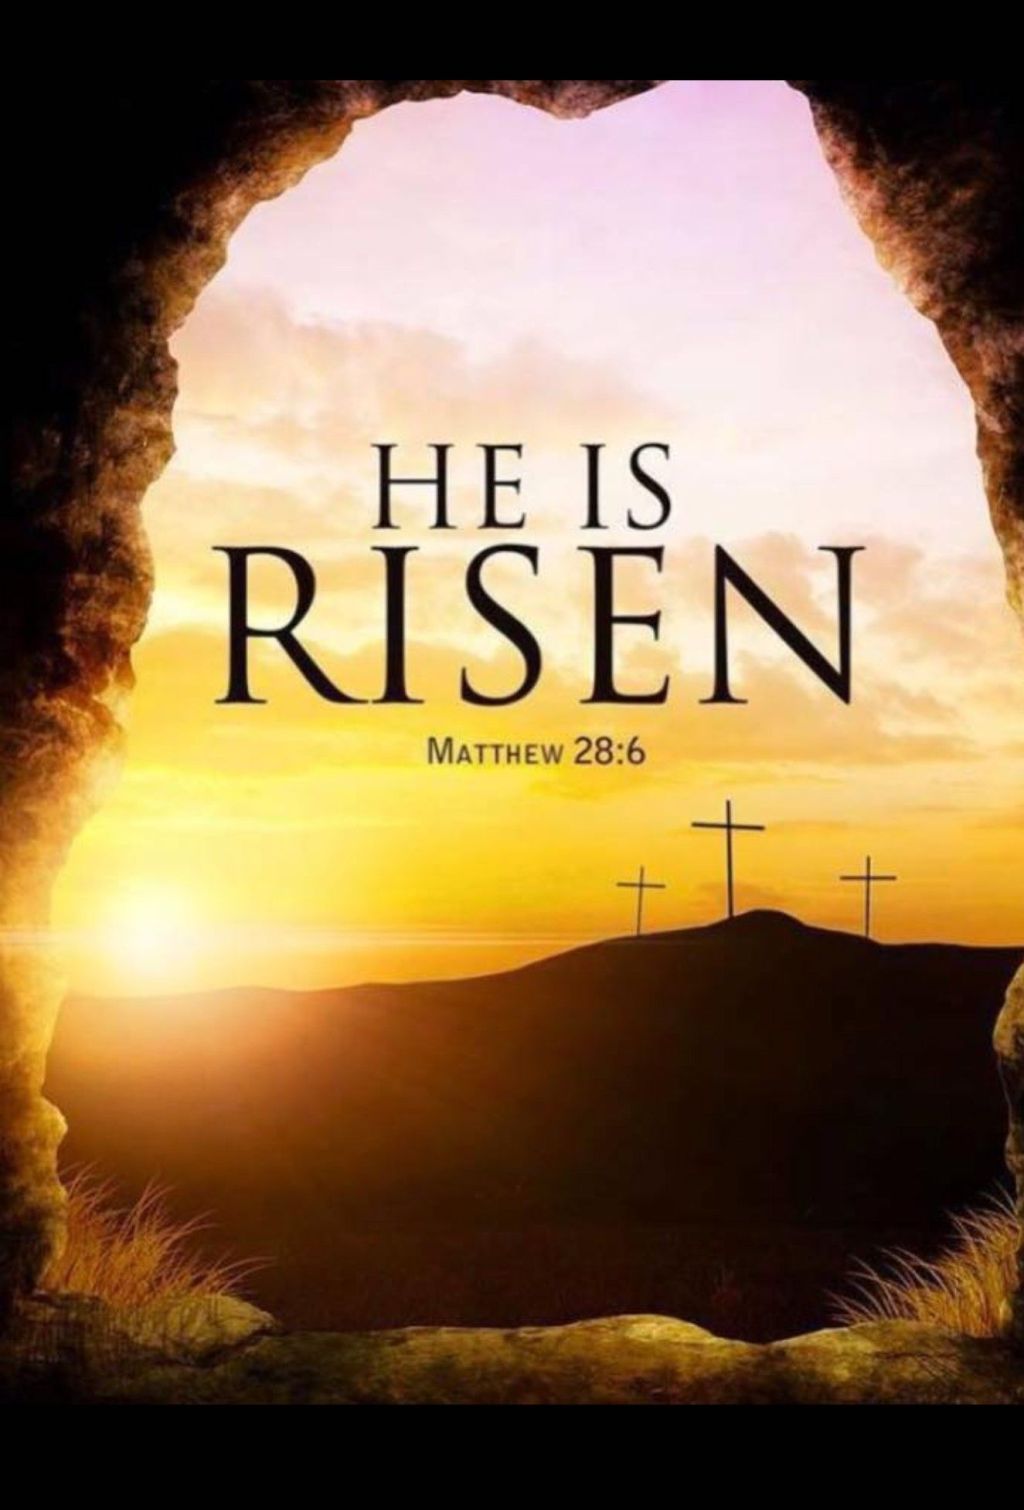 Just Talk with Joe Meyer VLOG: Happy Resurrection Day – Easter Message